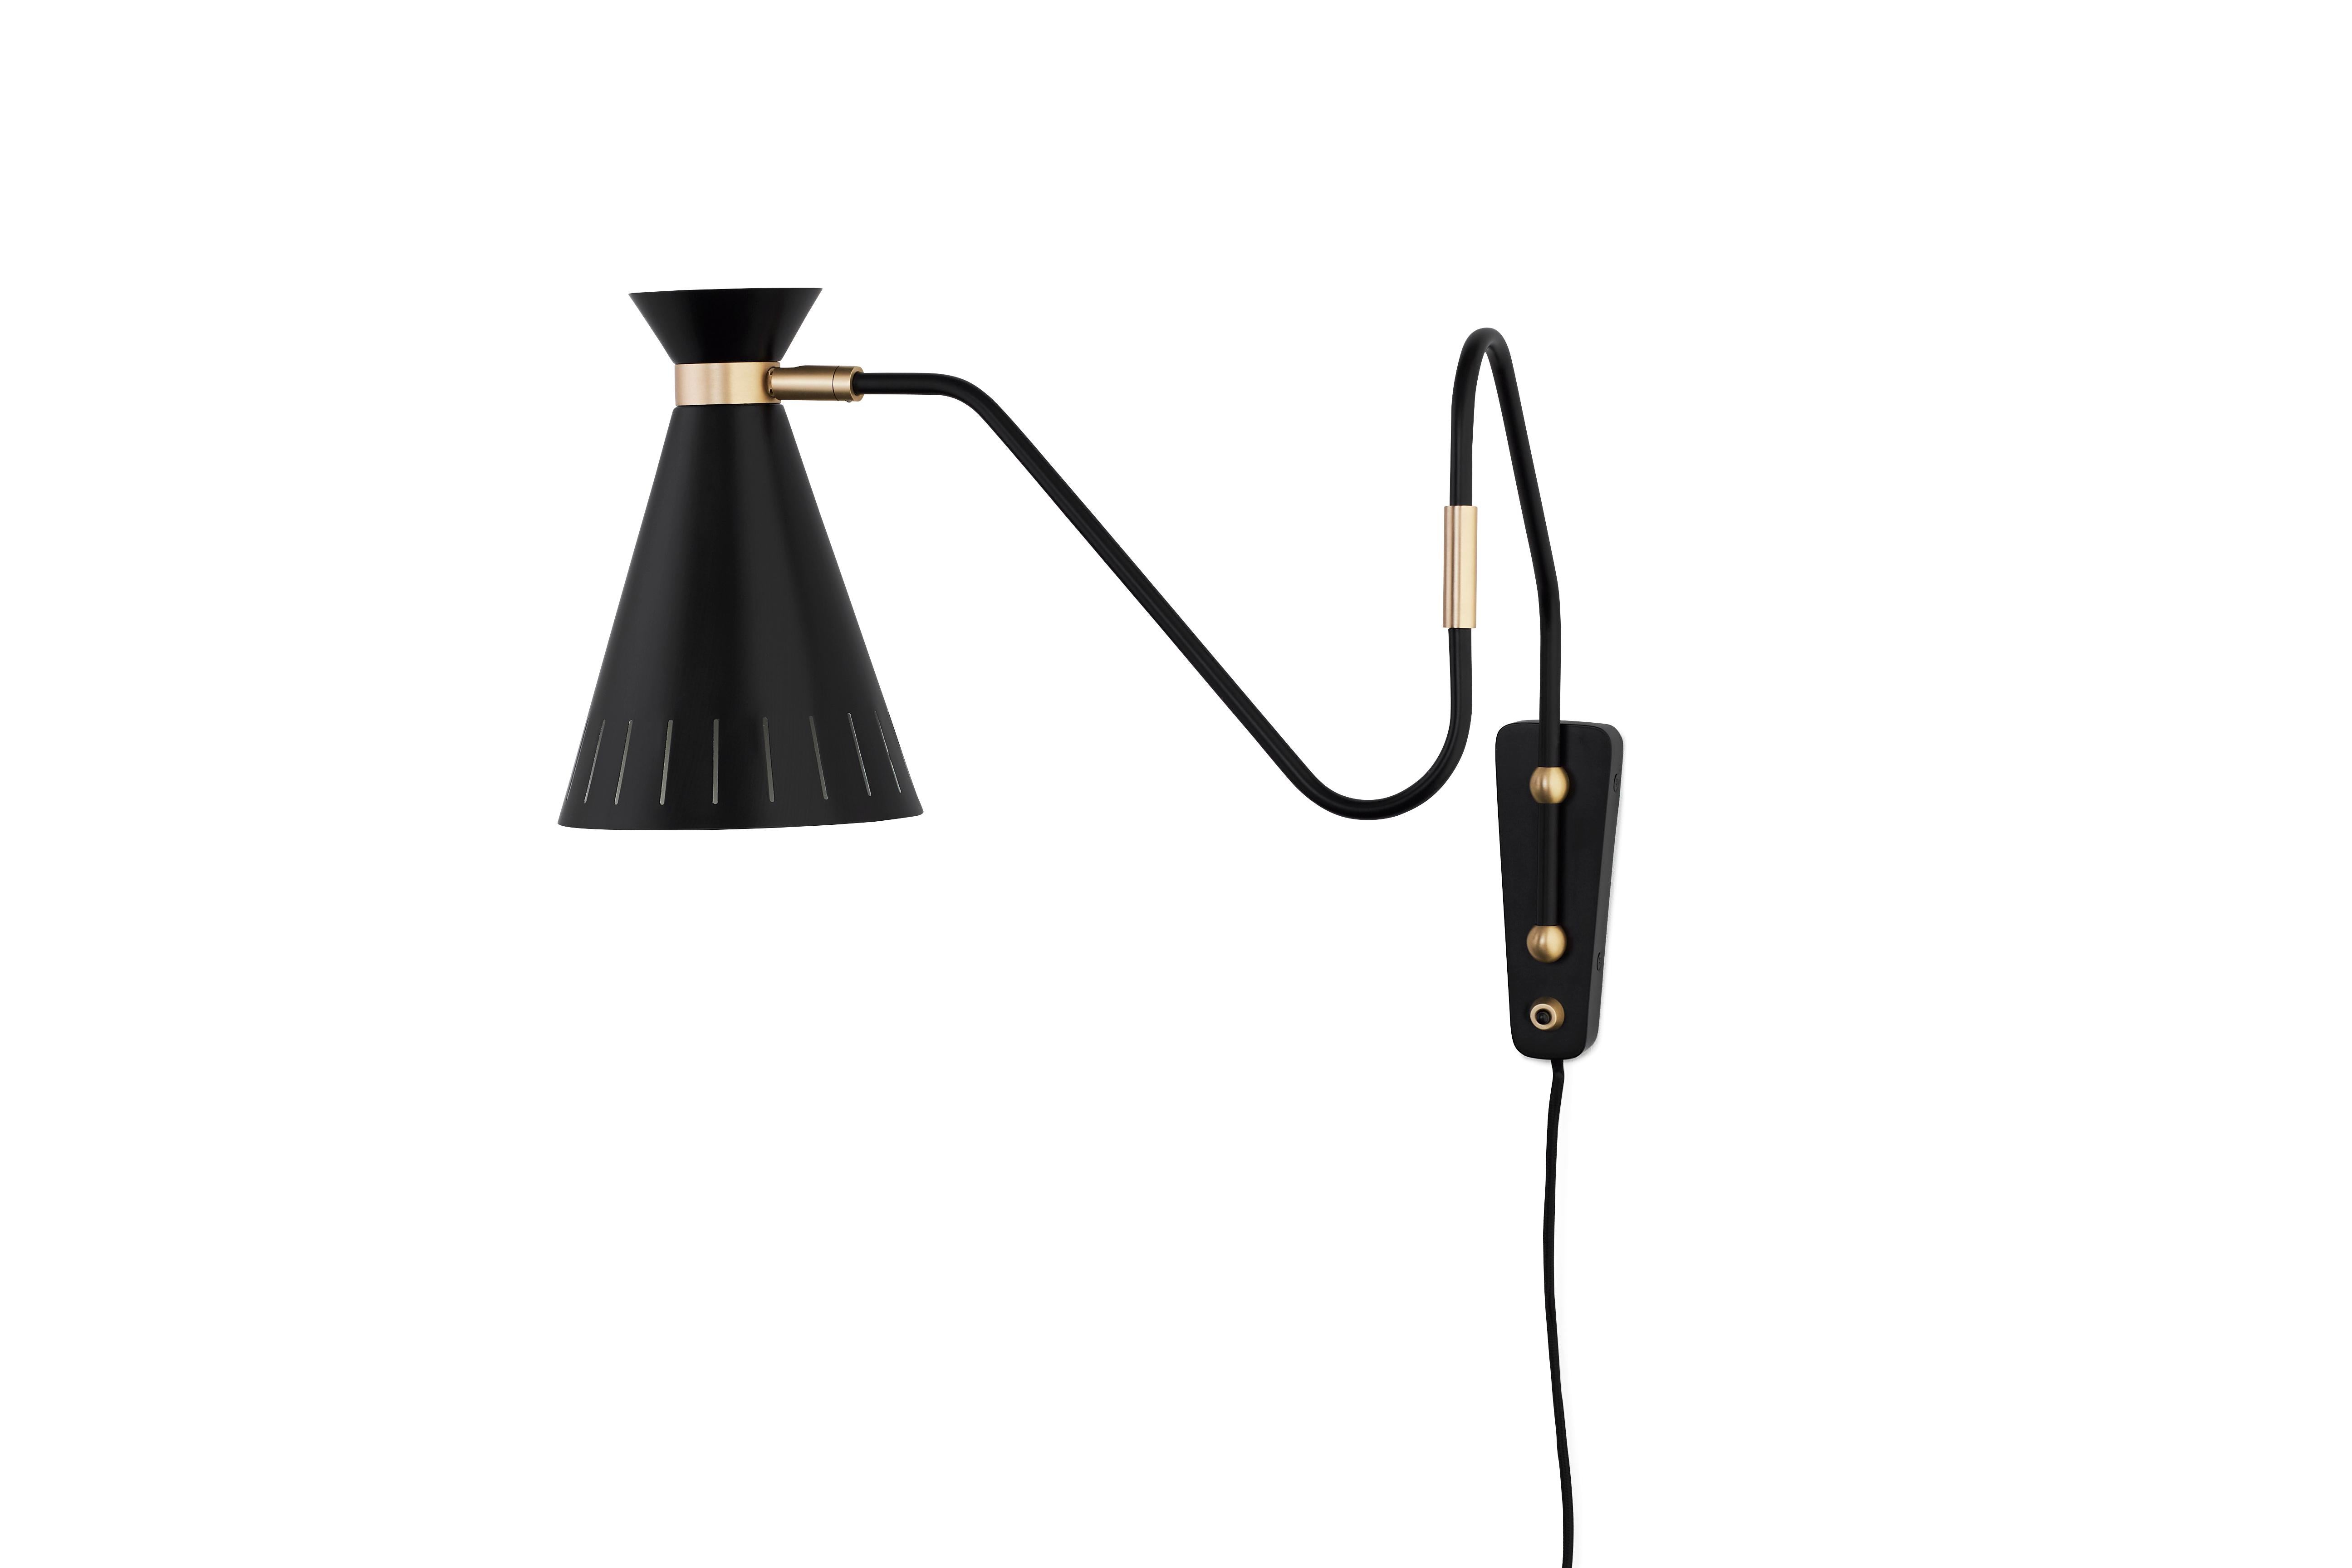 Cone Black Noir Wall Lamp by Warm Nordic
Dimensions: D16 x W63 x H30 cm
Material: Lacquered steel, Solid brass
Weight: 1 kg
Also available in different colours. Please contact us.

A classic wall light with charm and finesse designed in the